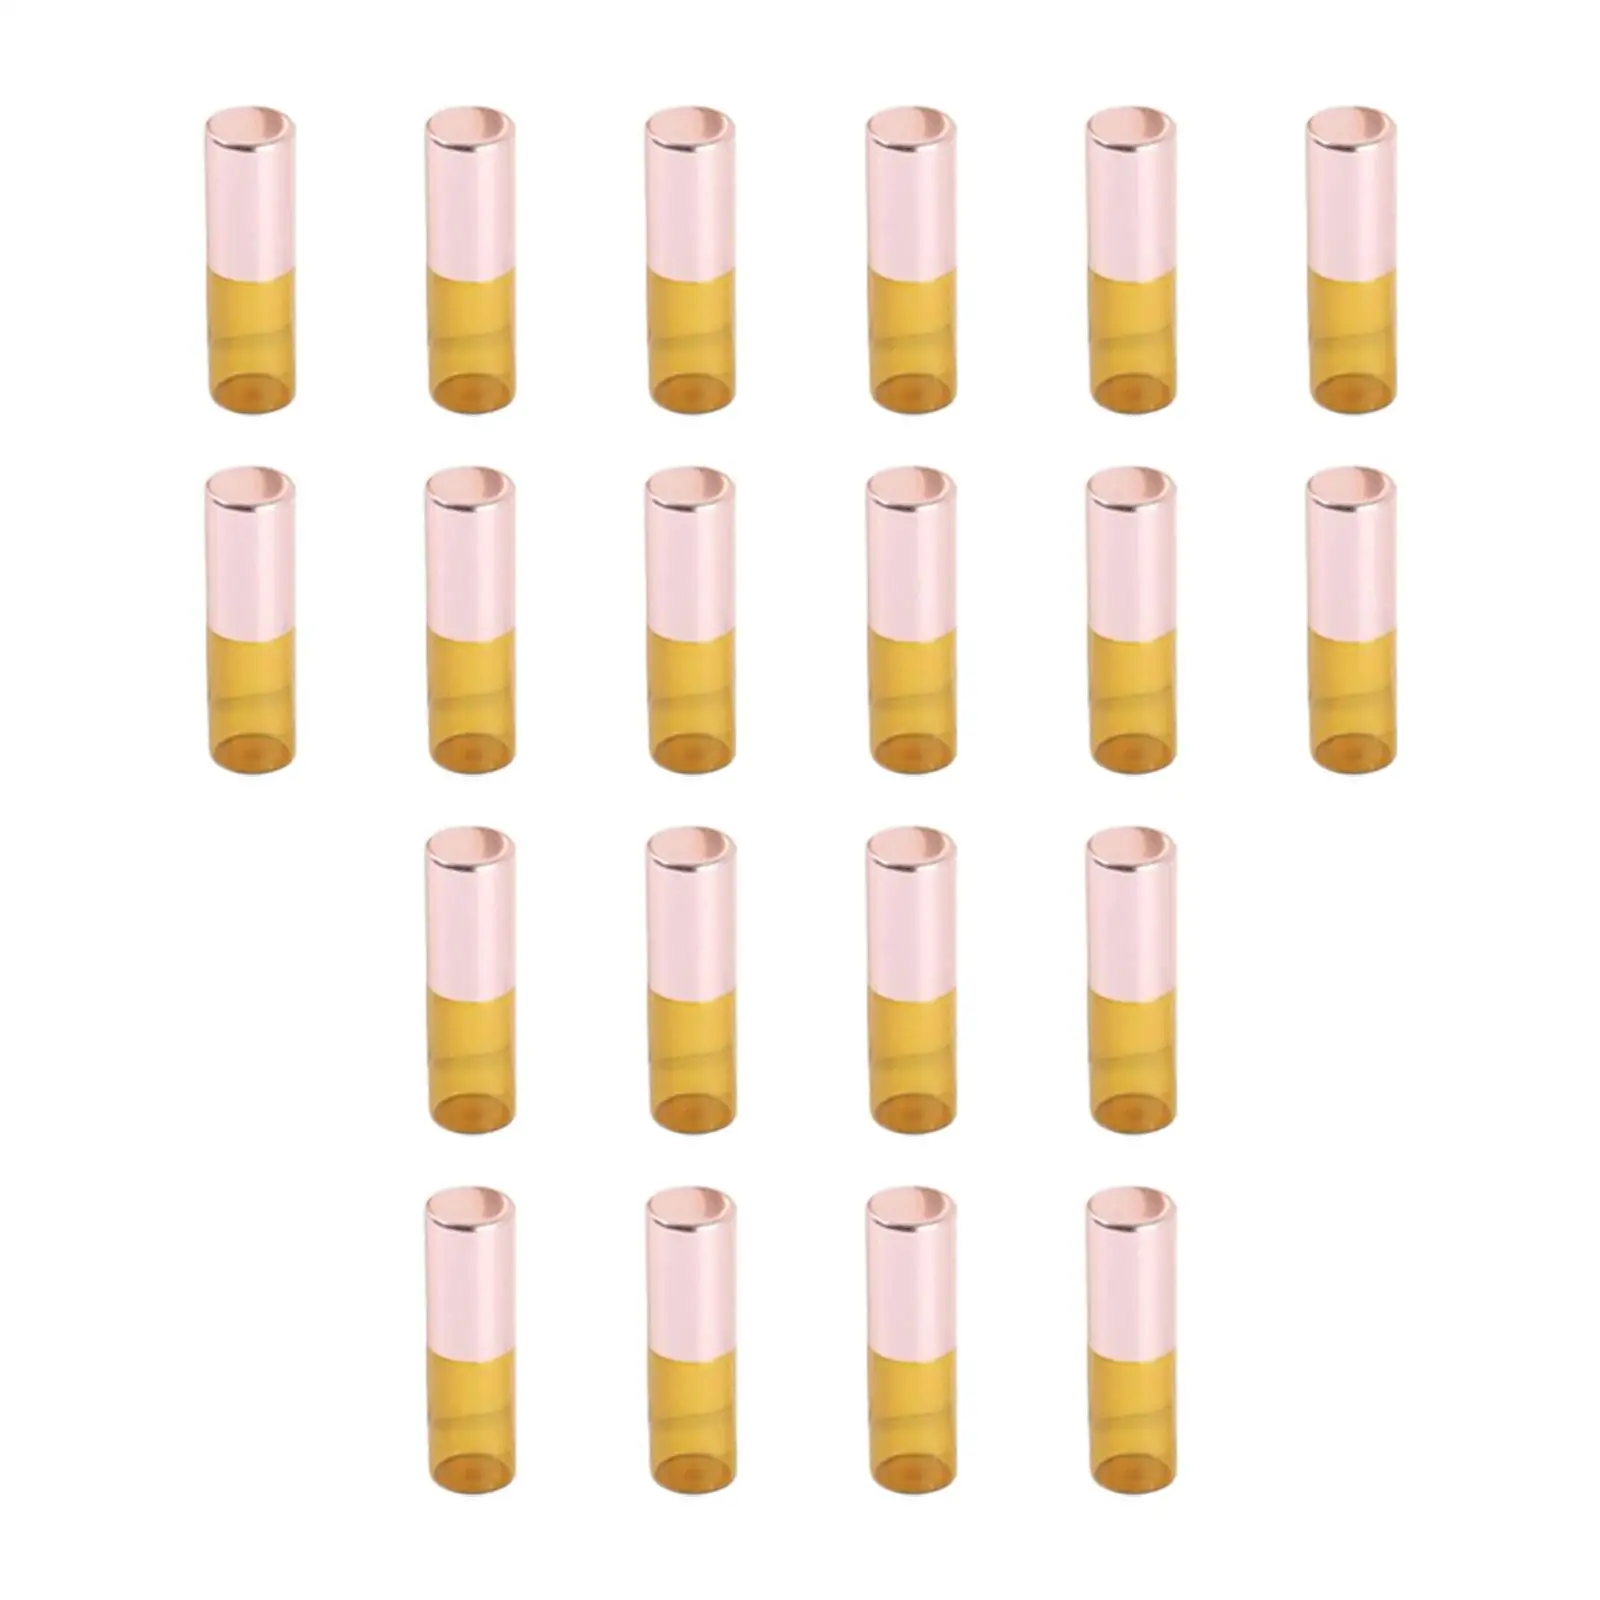 20Pcs Refillable Amber Glass Roll On Bottles Holder for Cosmetic Makeup Sample Smooth Rolling Metal Ball Accessory Lightweight